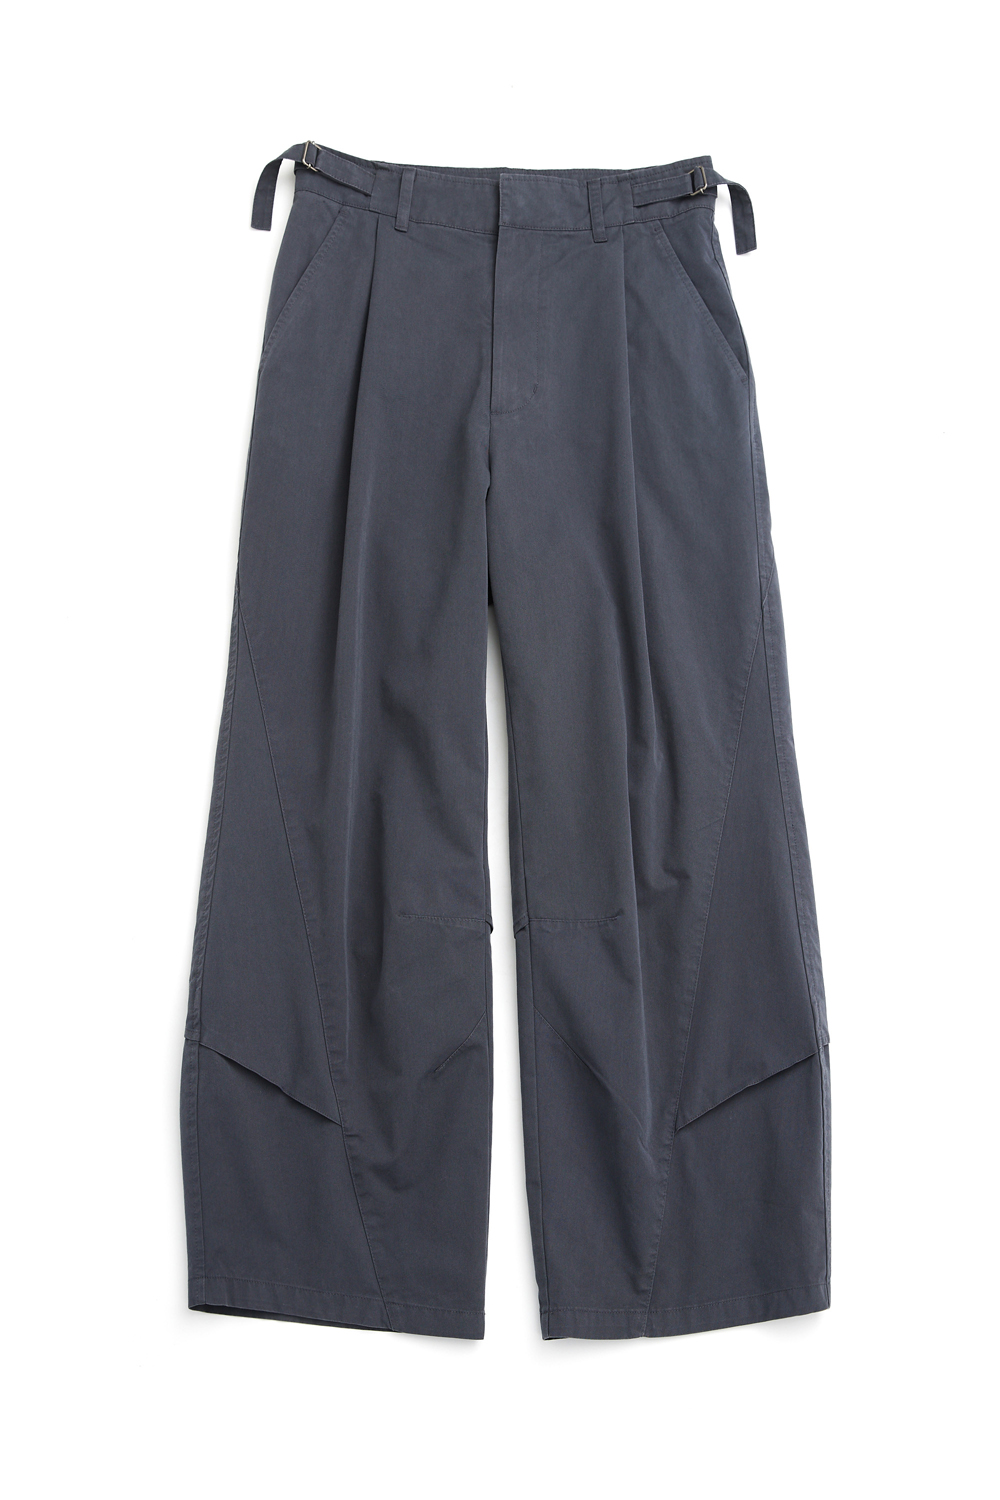 Triangle Trousers V2 Washed Blue Charcoal